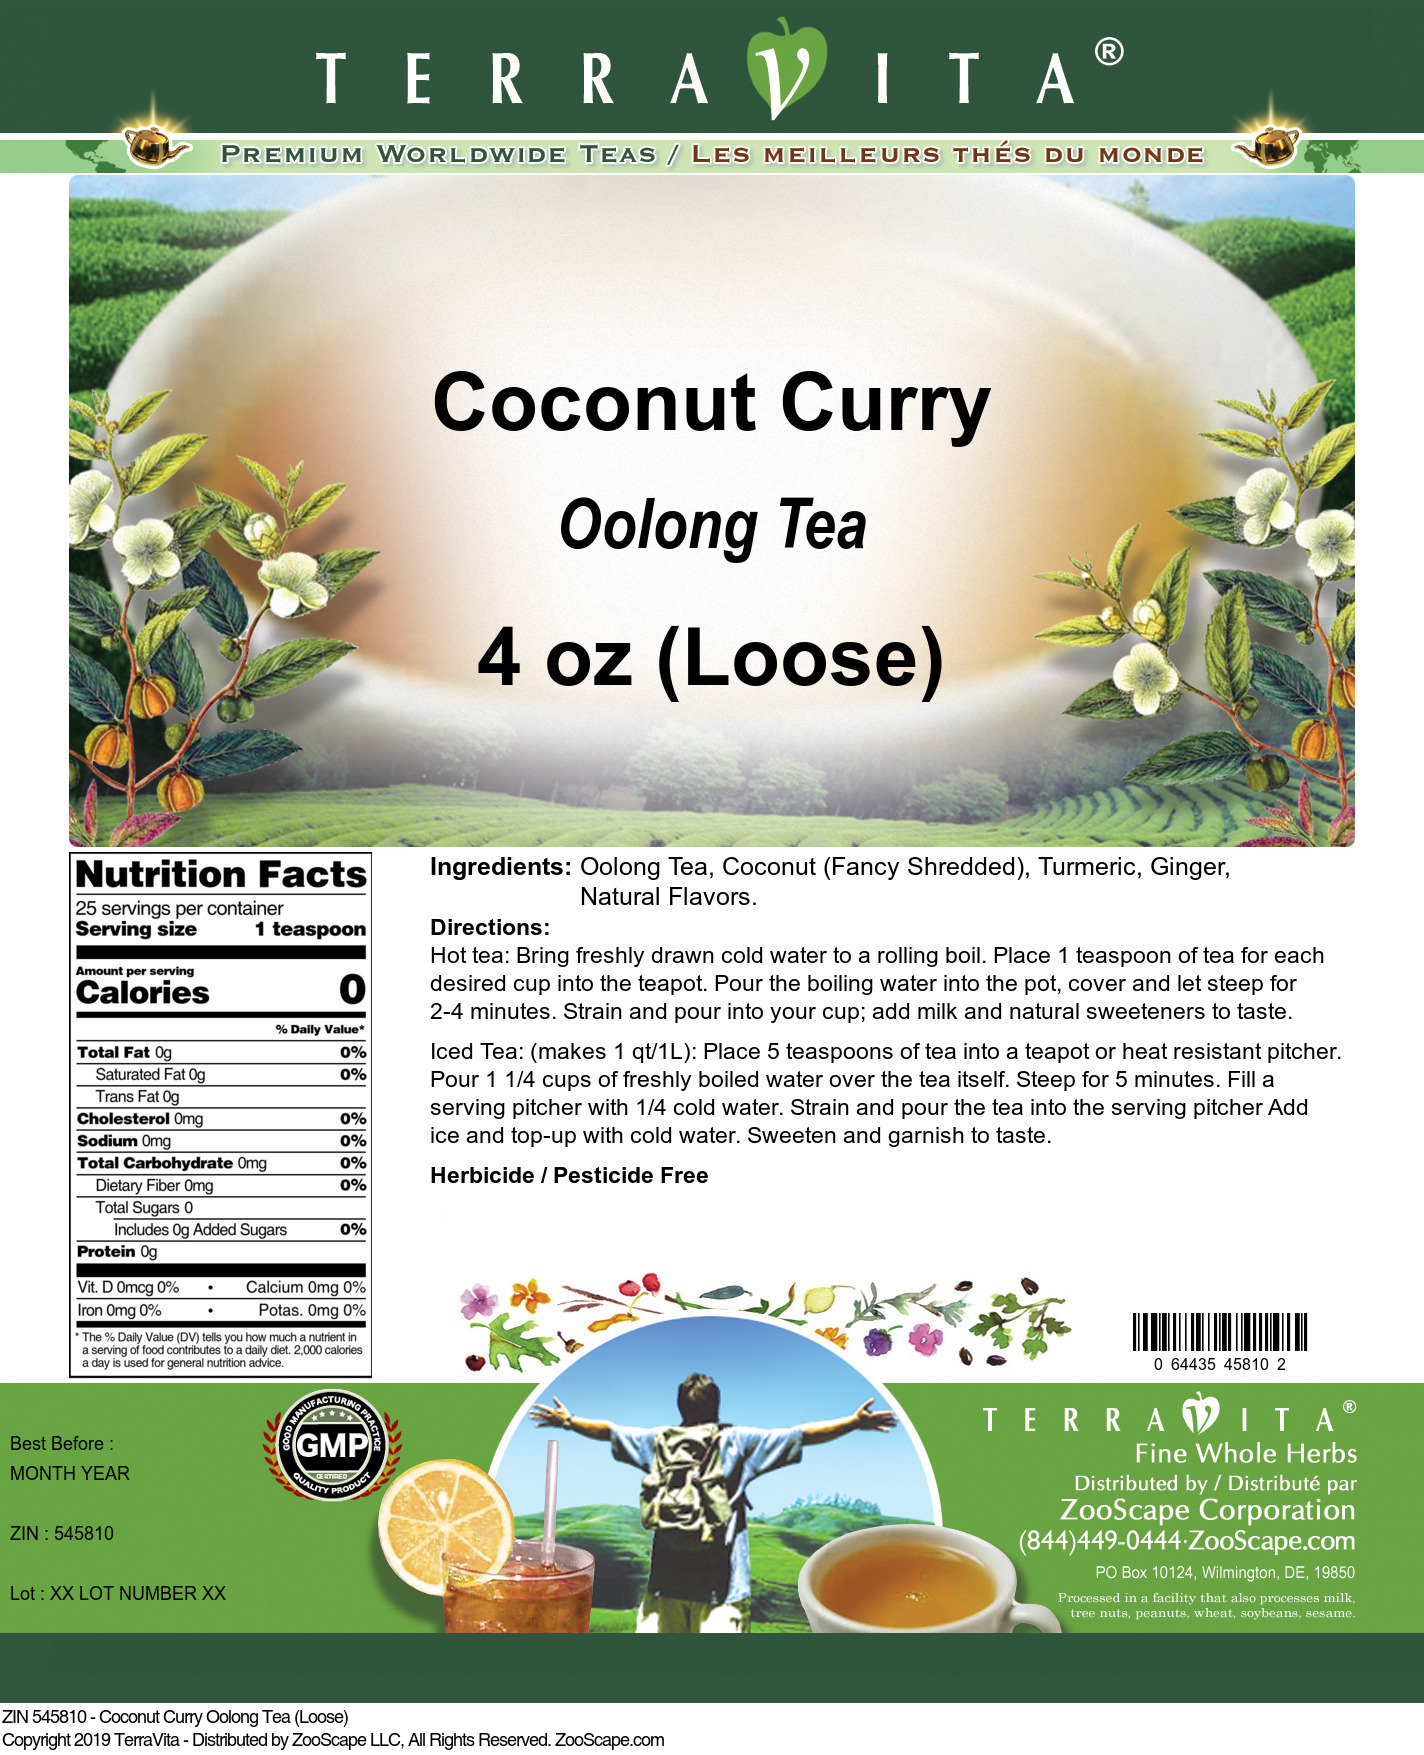 Coconut Curry Oolong Tea (Loose) - Label